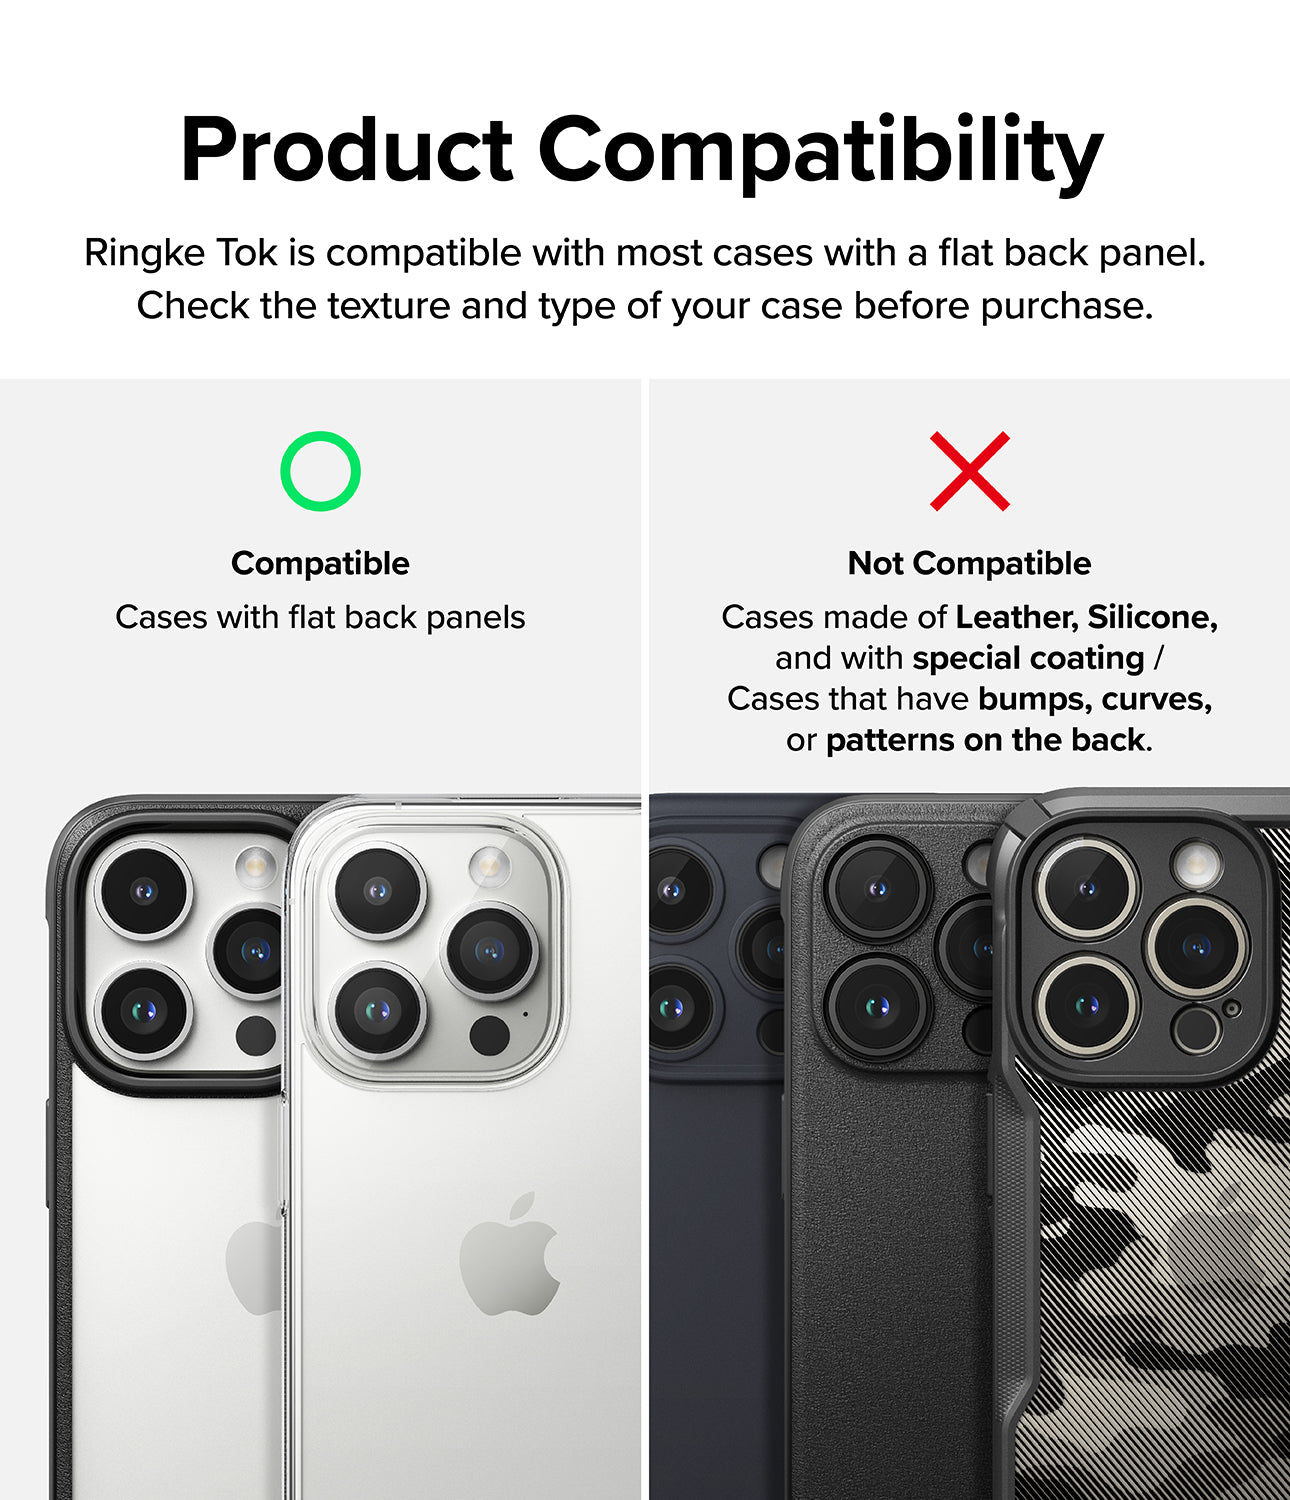 Ringke Tok - Product Compatibility. Ringke Tok is compatible with most cases with a flat back panel. Check the texture and type of your case before pirchase.